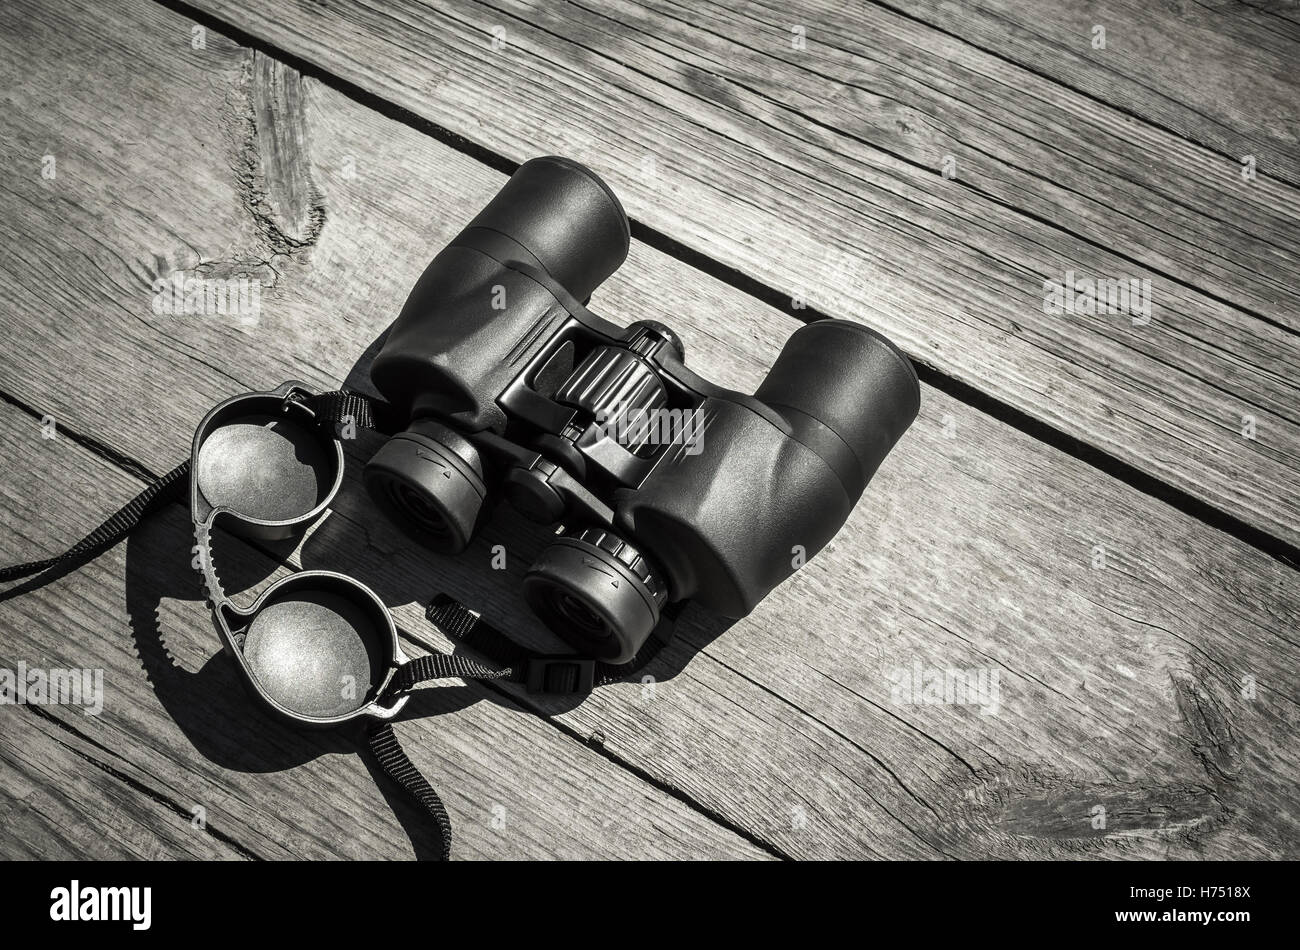 Black touristic binoculars lays on rough outdoor wooden table Stock Photo